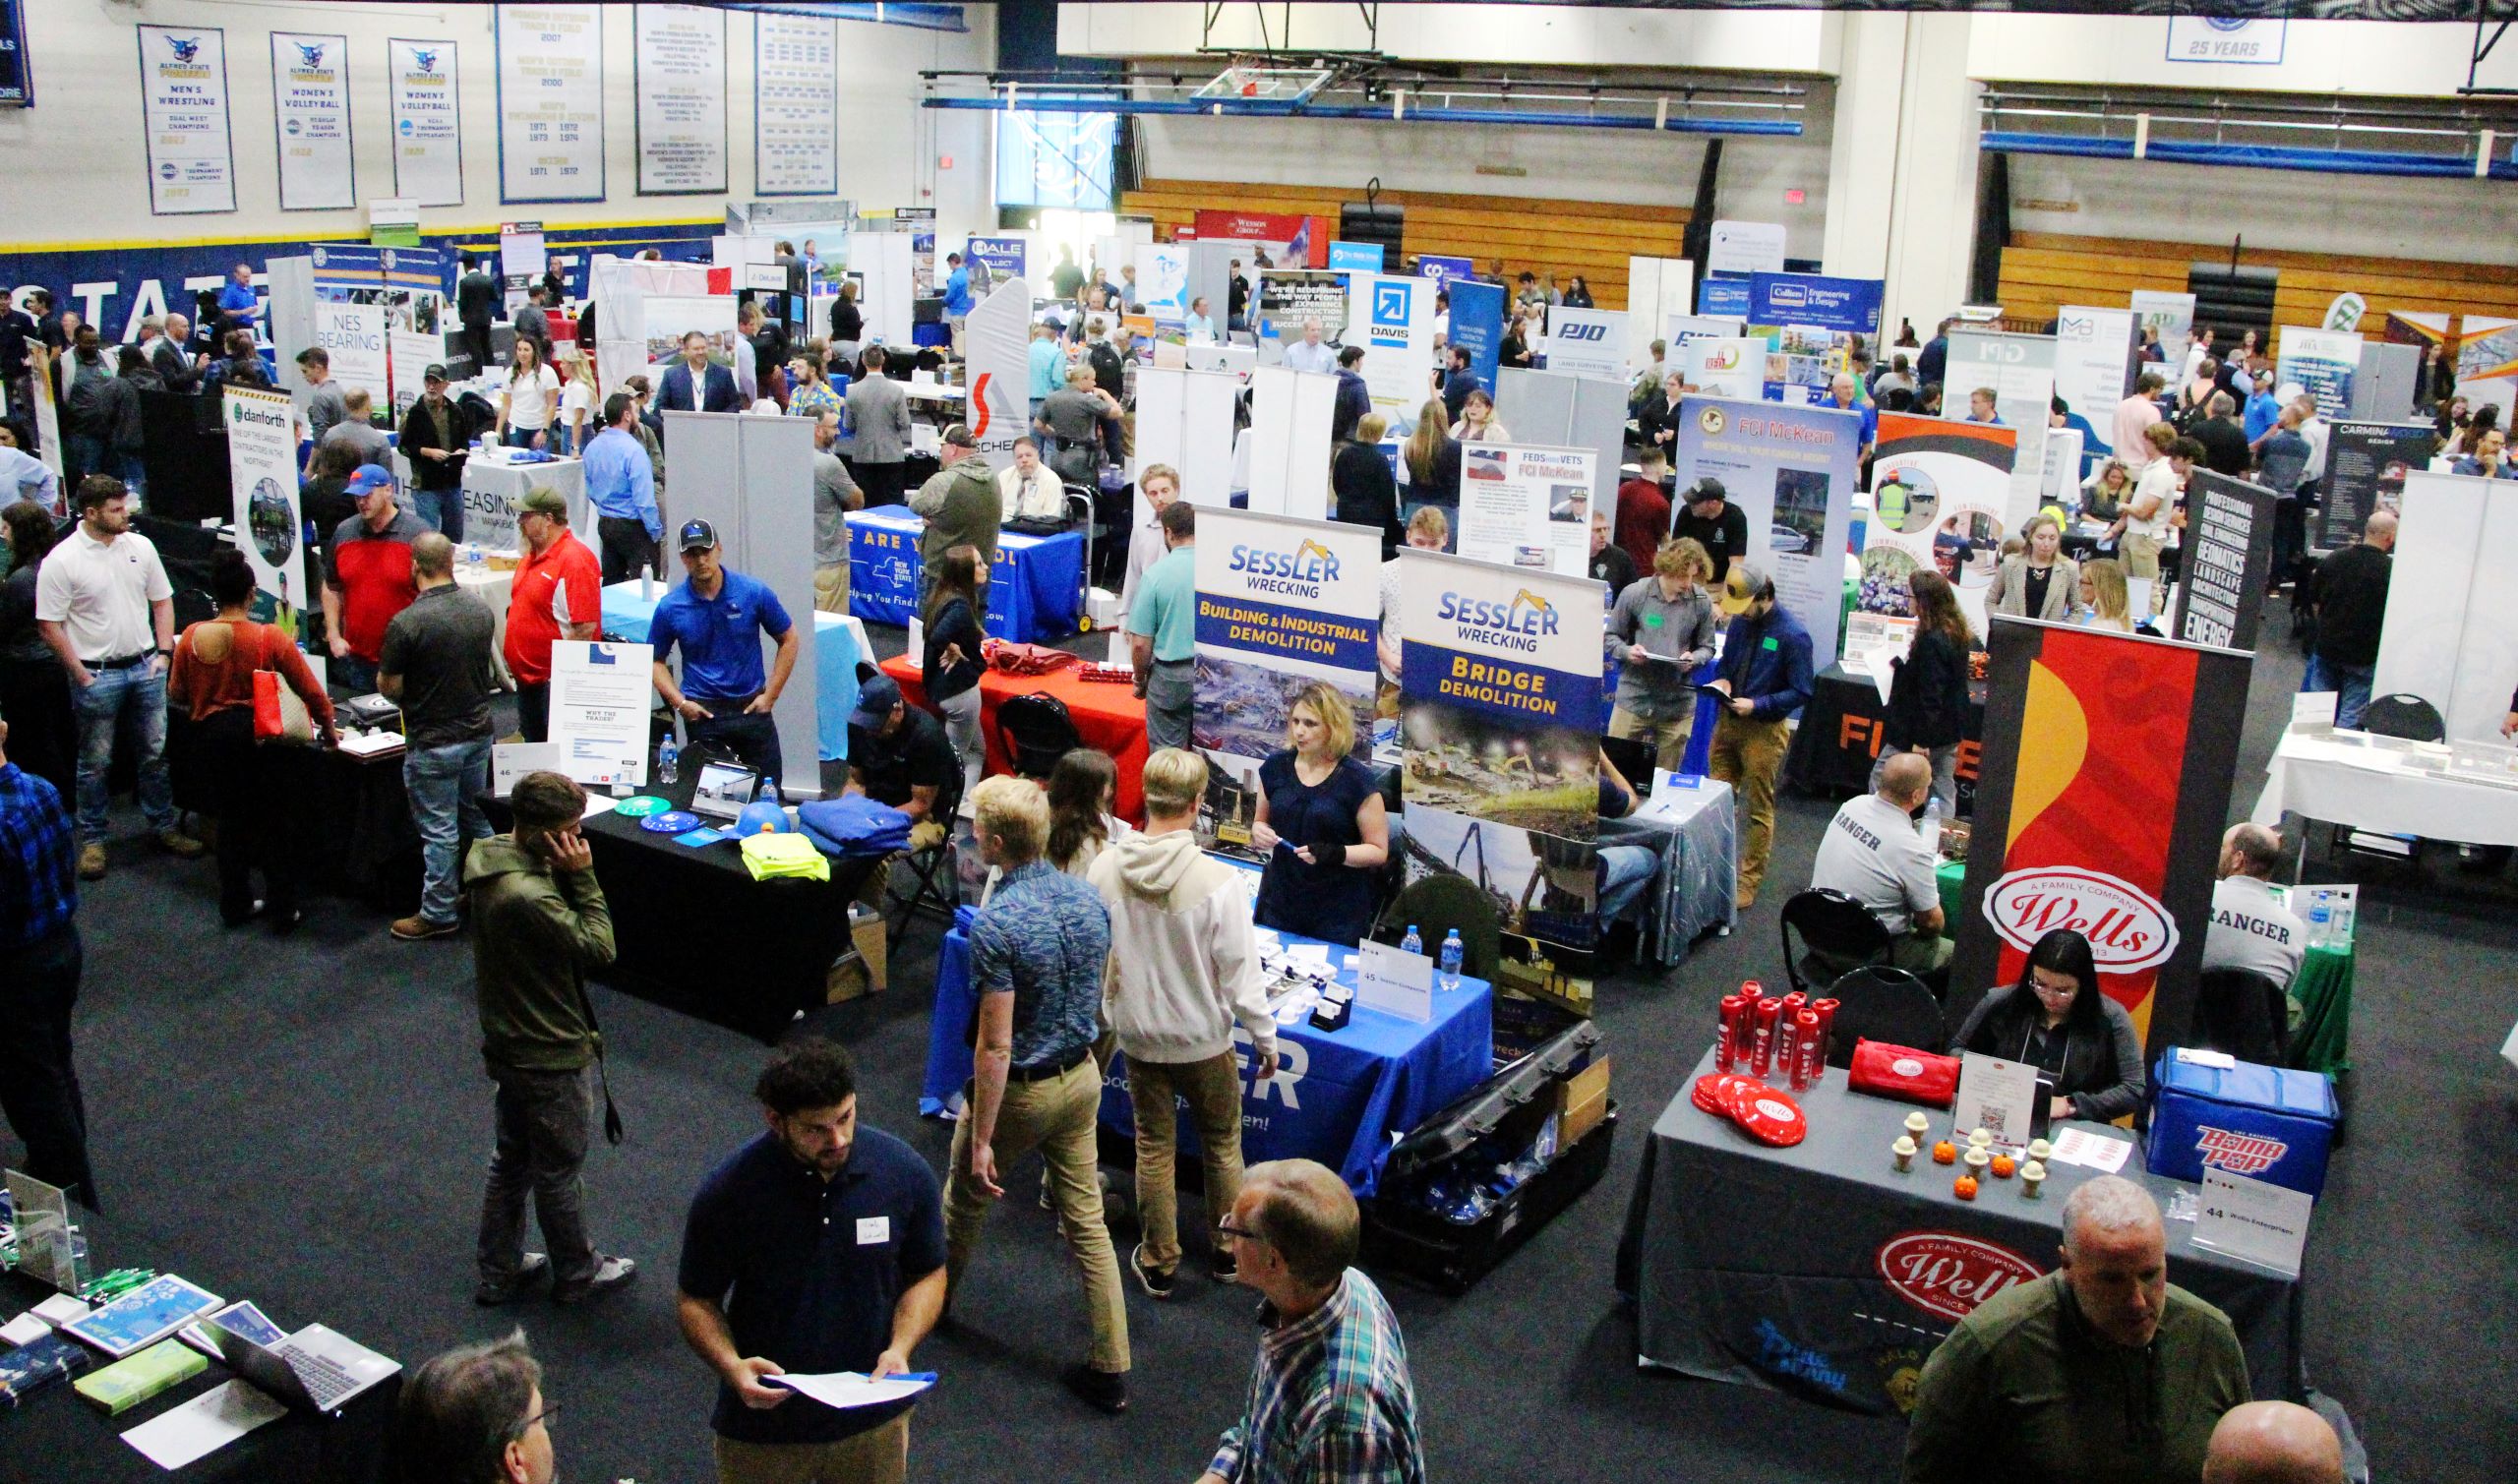 Students attend a career fair and speak to Western New York employers at Alfred State College.